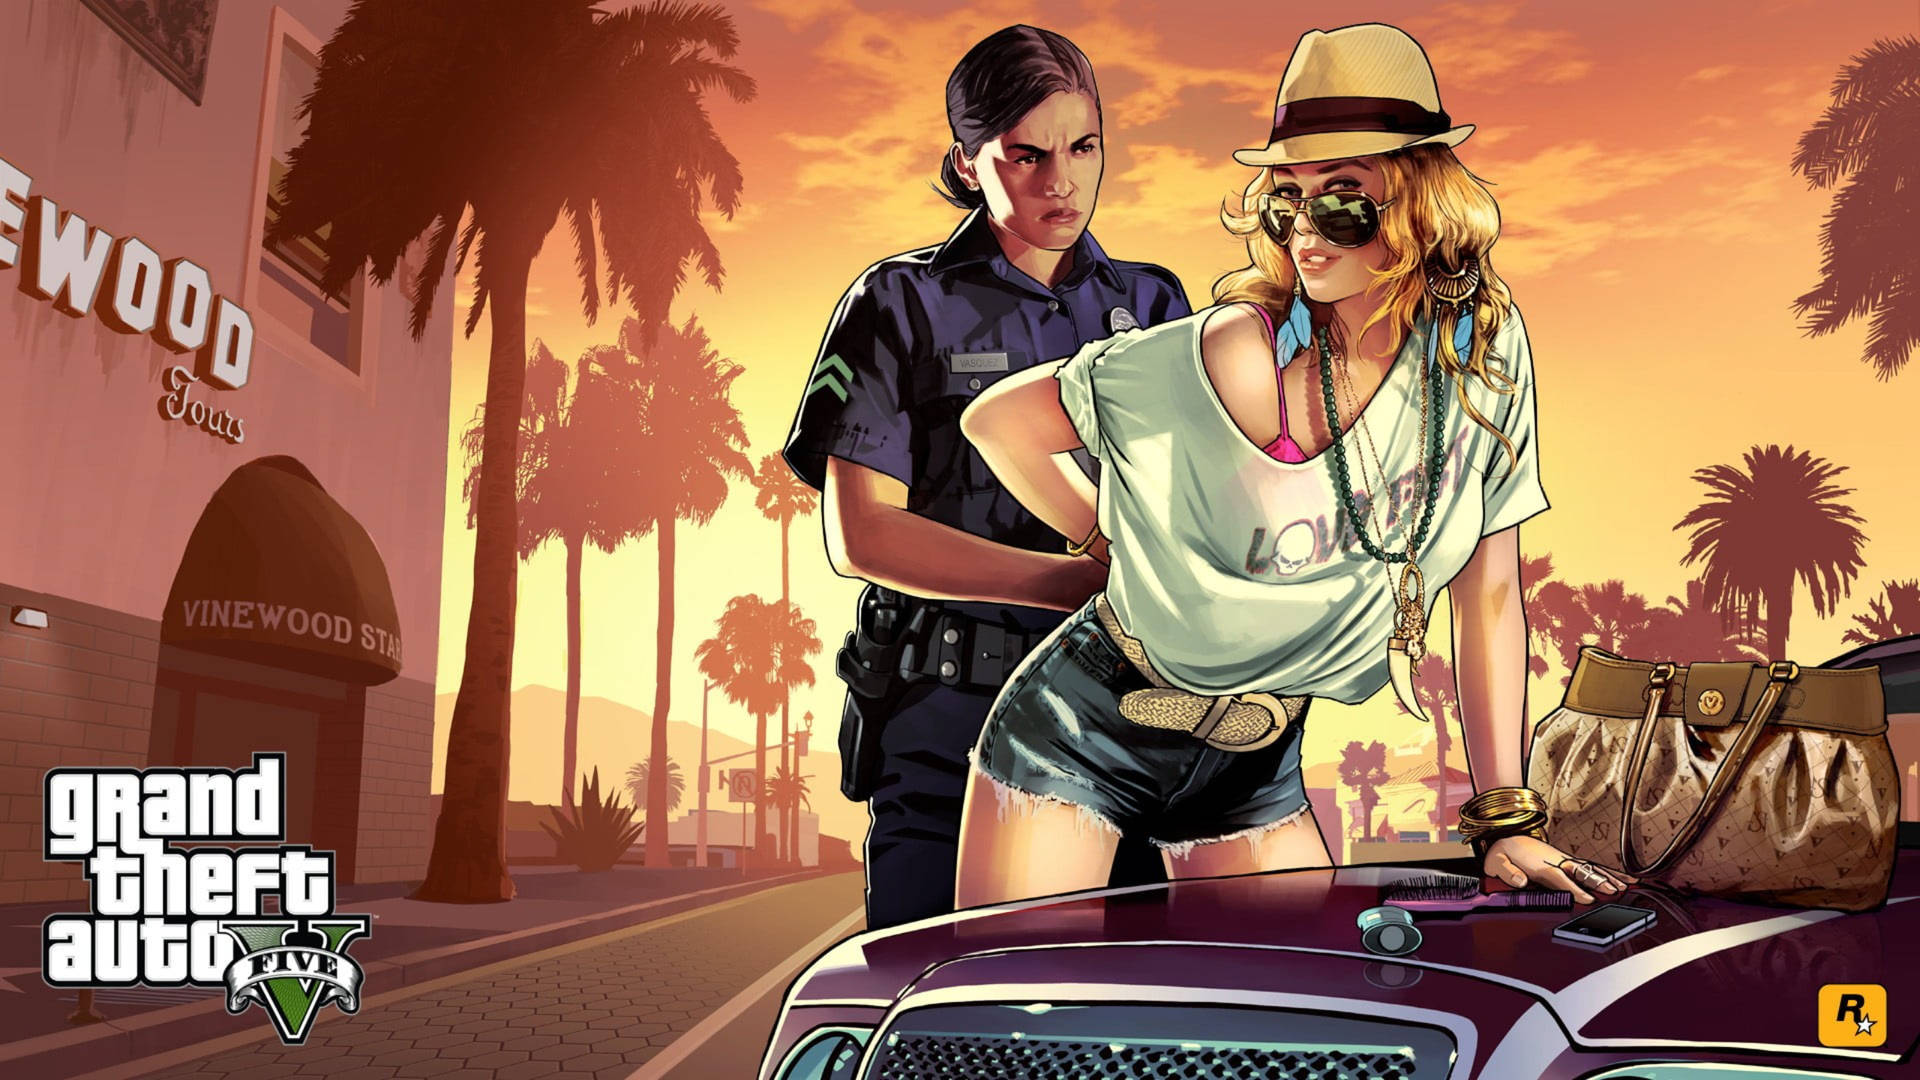 Grand Theft Auto Arresting A Woman Background